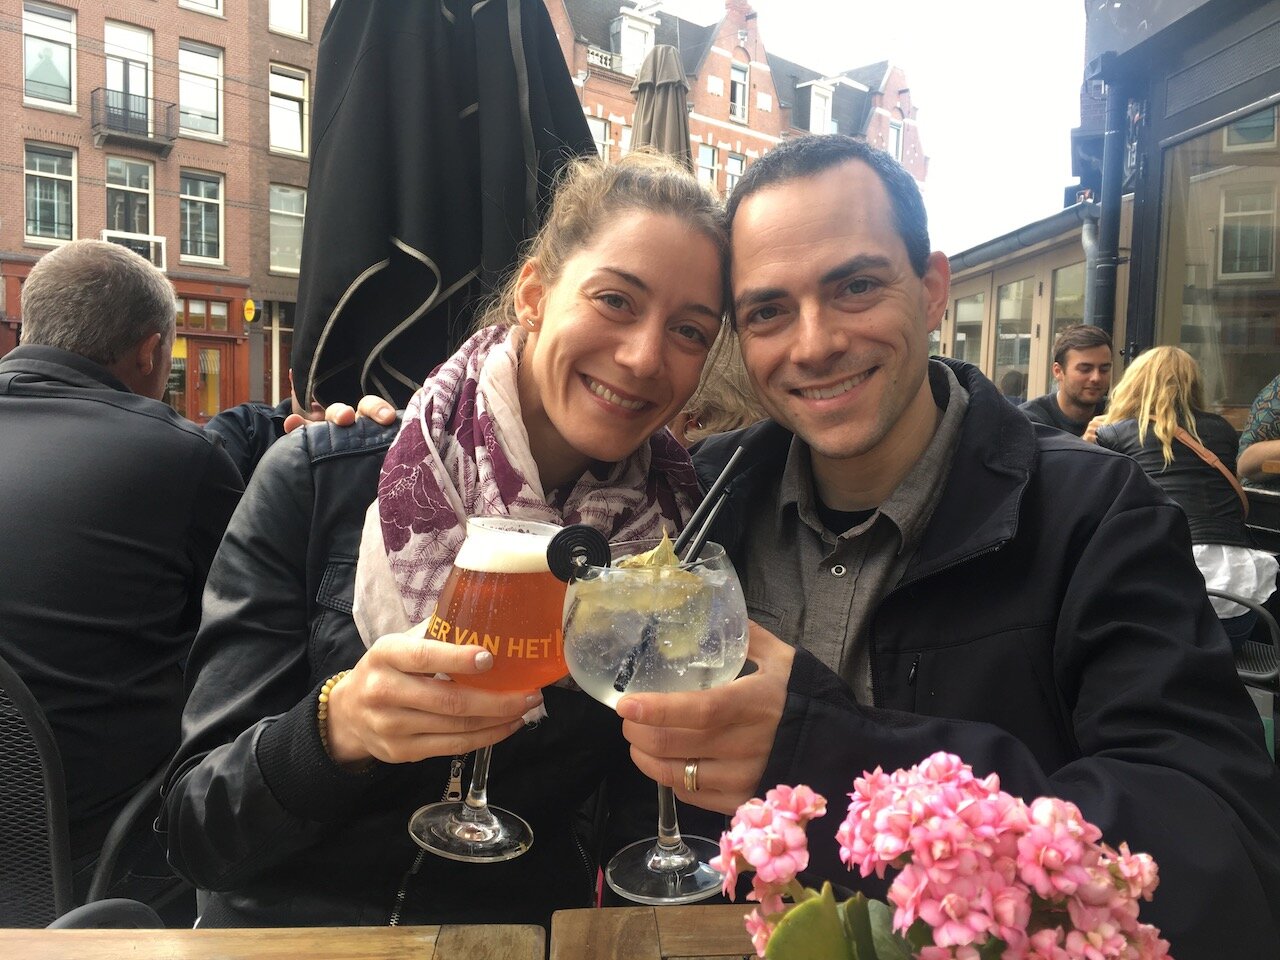  Toasting the moment our Sprinter RV purchase became official – in Amsterdam, ahead of our friend’s wedding in Spain, 5/20/17. 